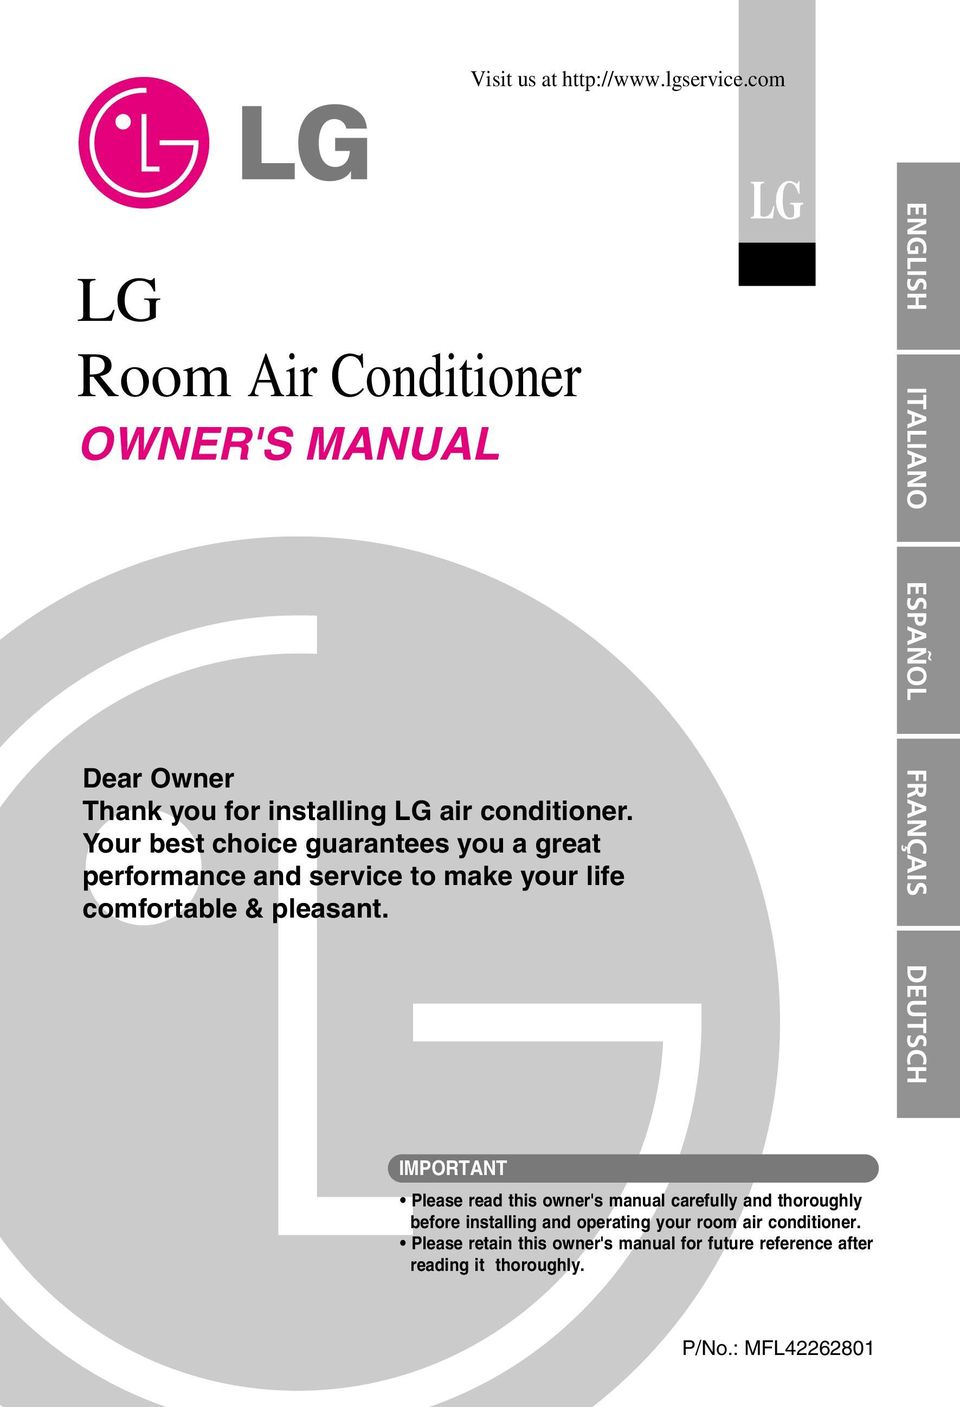 Lg Room Air Conditioner Owner S Manual Pdf Free Download